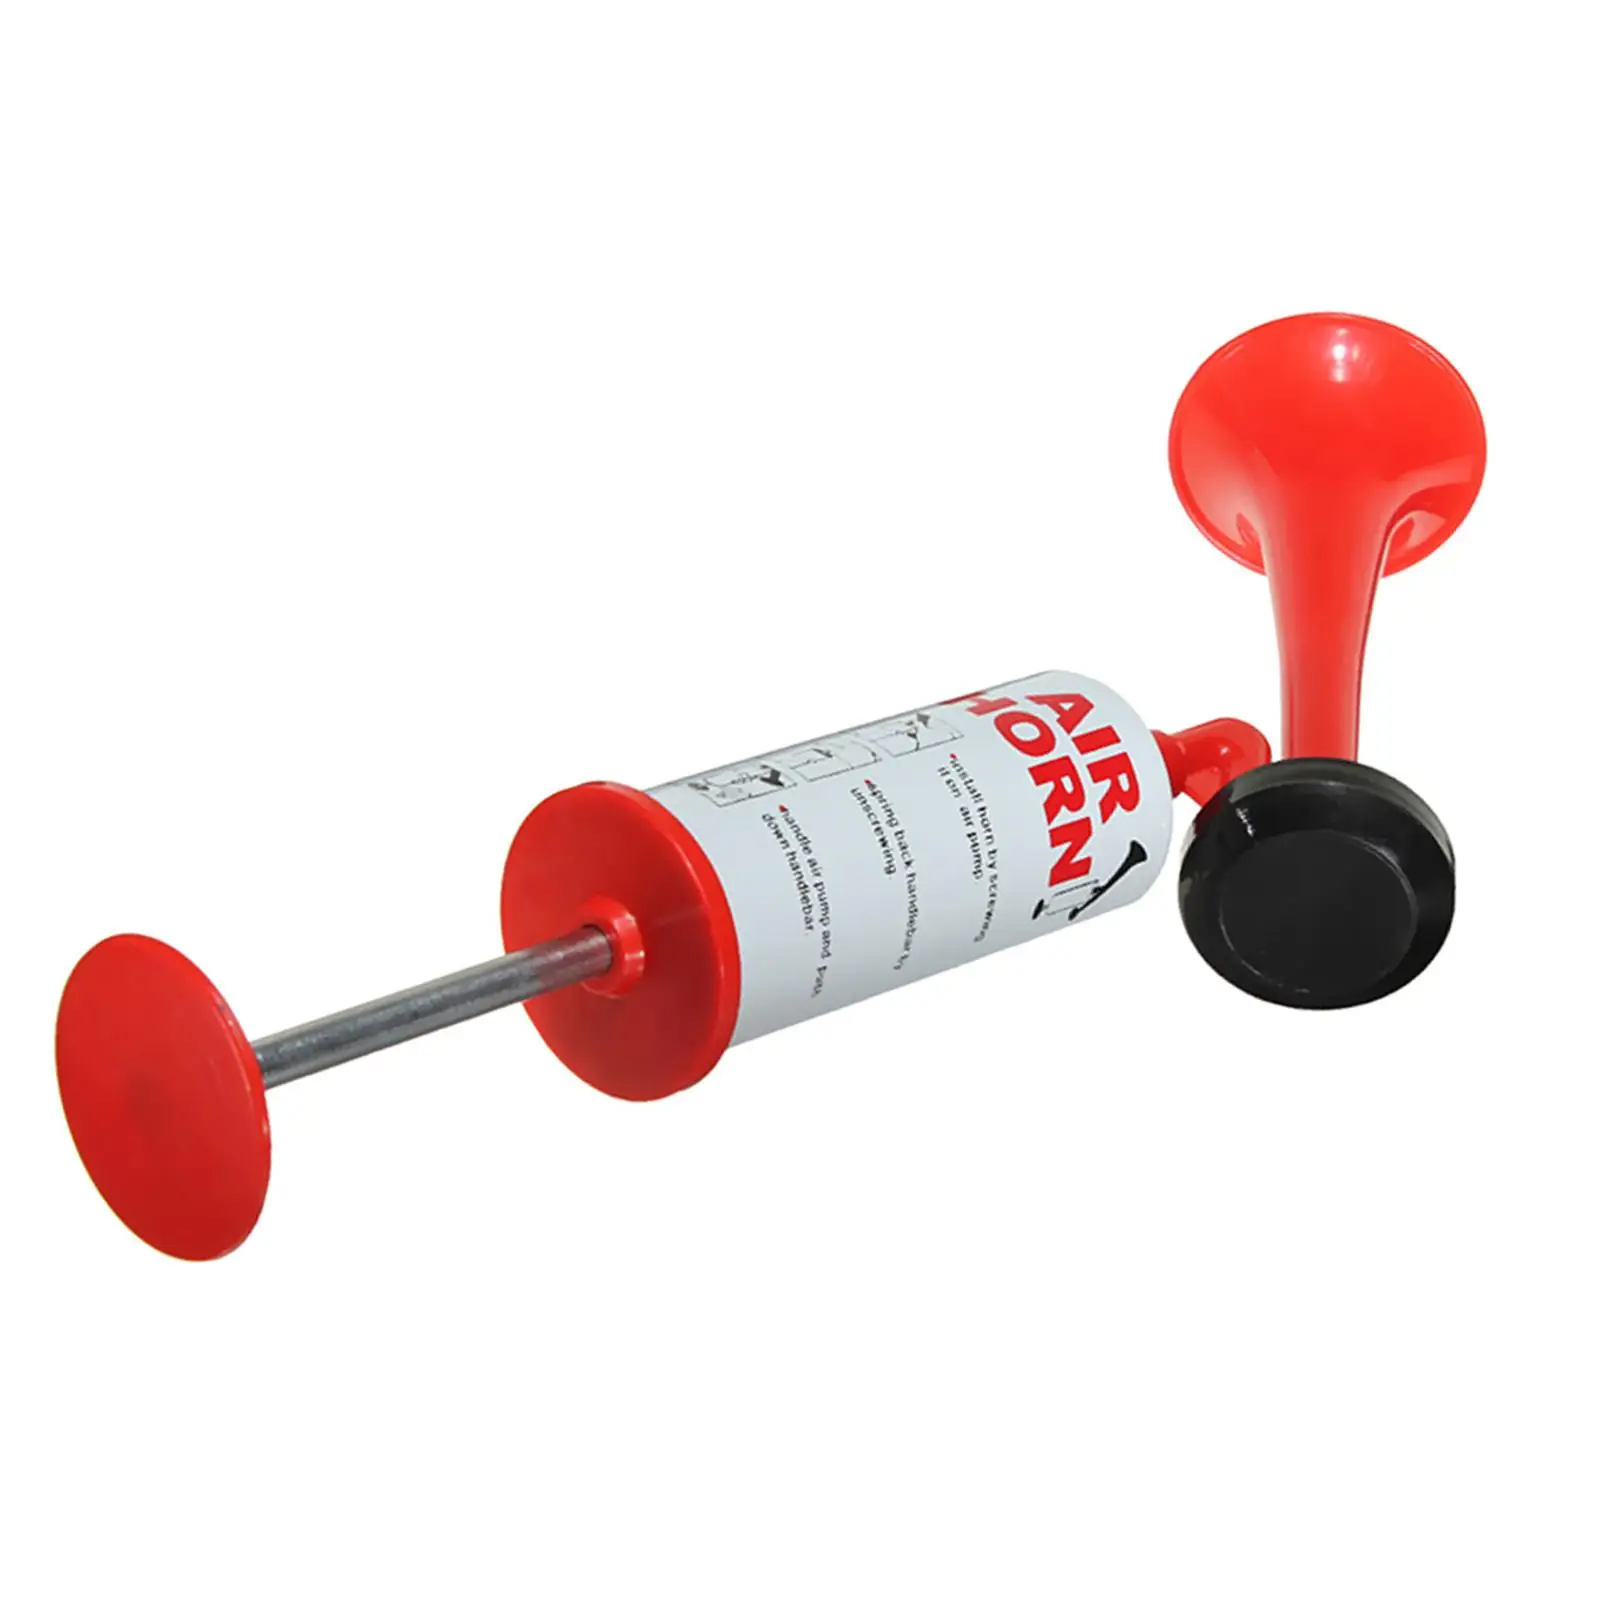 Air  Pump Trumpet for Car Boating Sports  Emergencies Parties High Quality